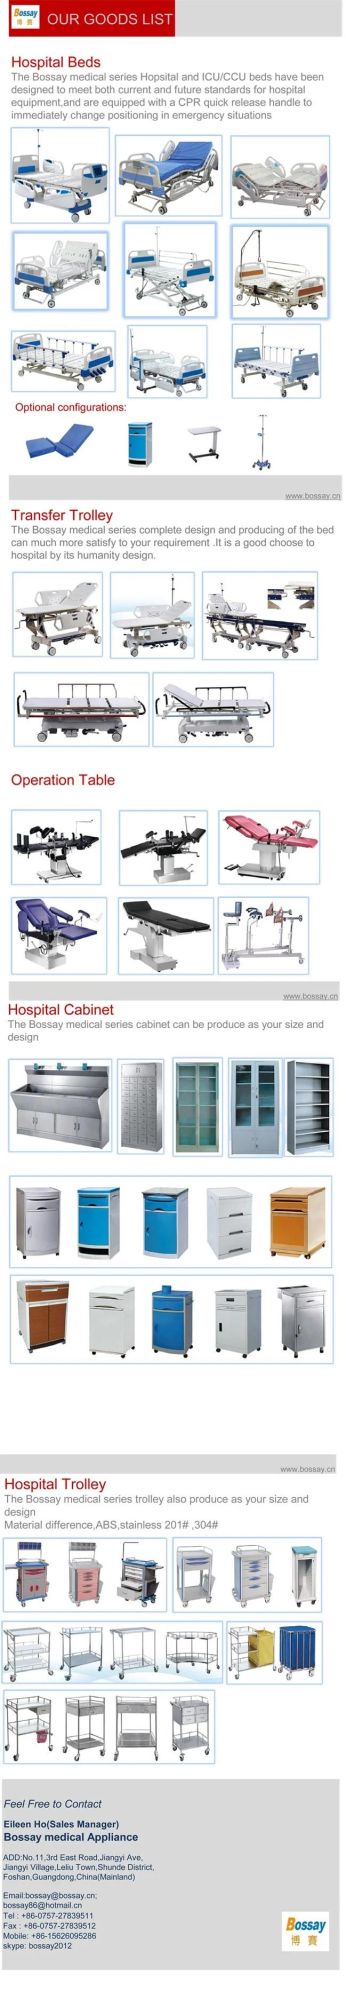 Movable Full-Fowler Manual Hospital Bed (BS-828B-1)